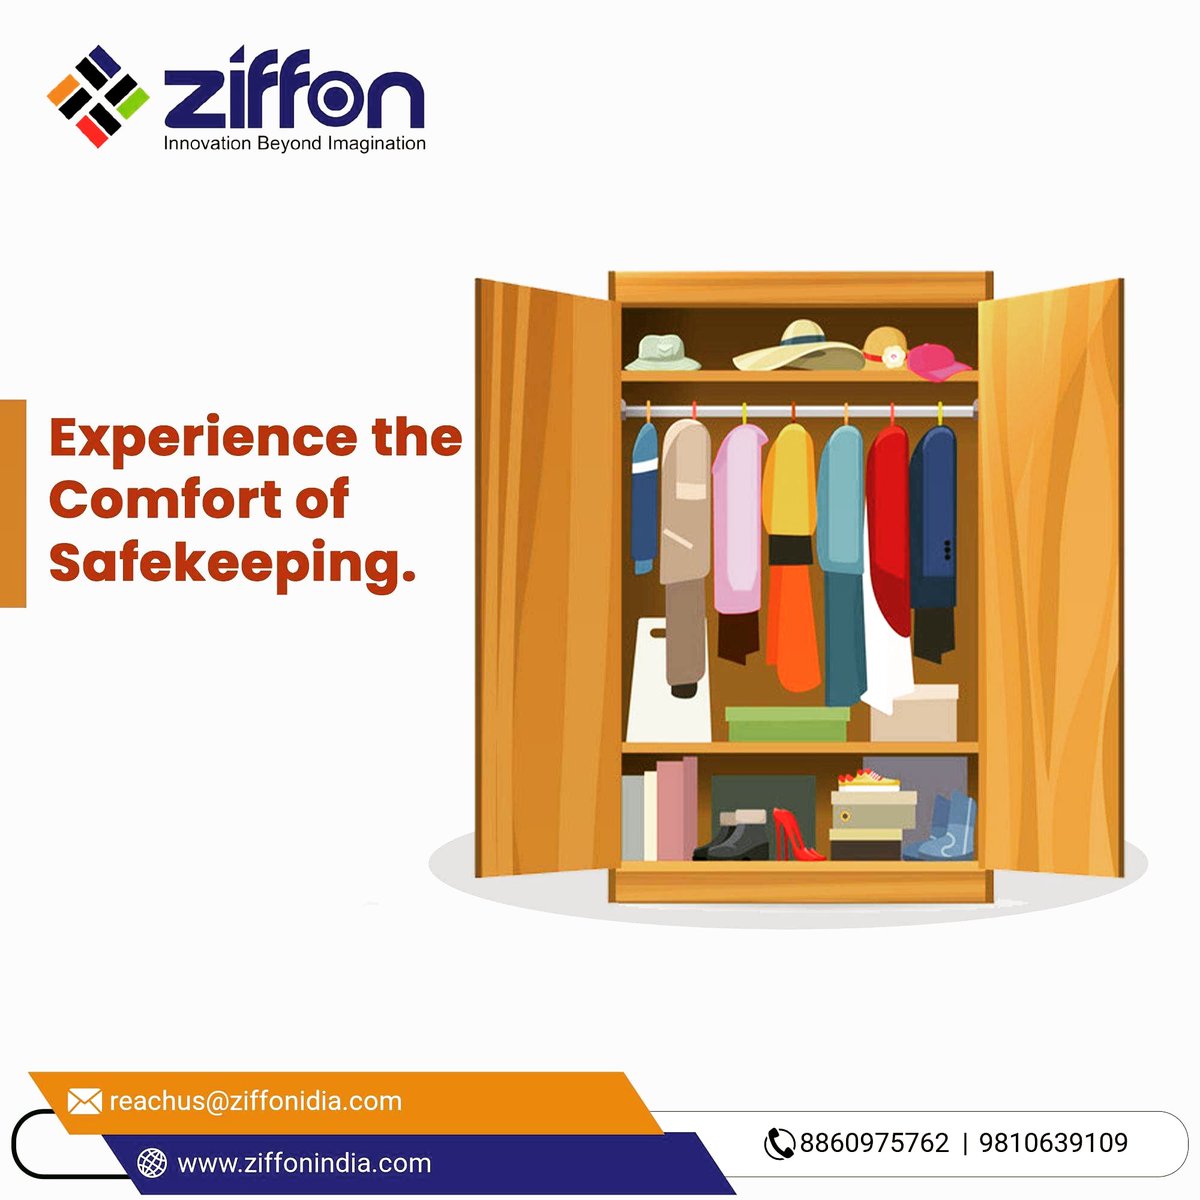 widest selection of contemporary designs, and high quality finishes by Ziffon. For further information please visit us at ziffonindia.com or feel free to contact on +91-8860975762 #ziffon #wardrobe #wardrobedesign #modularwardrobe #almirah #almirahdesign #furniture